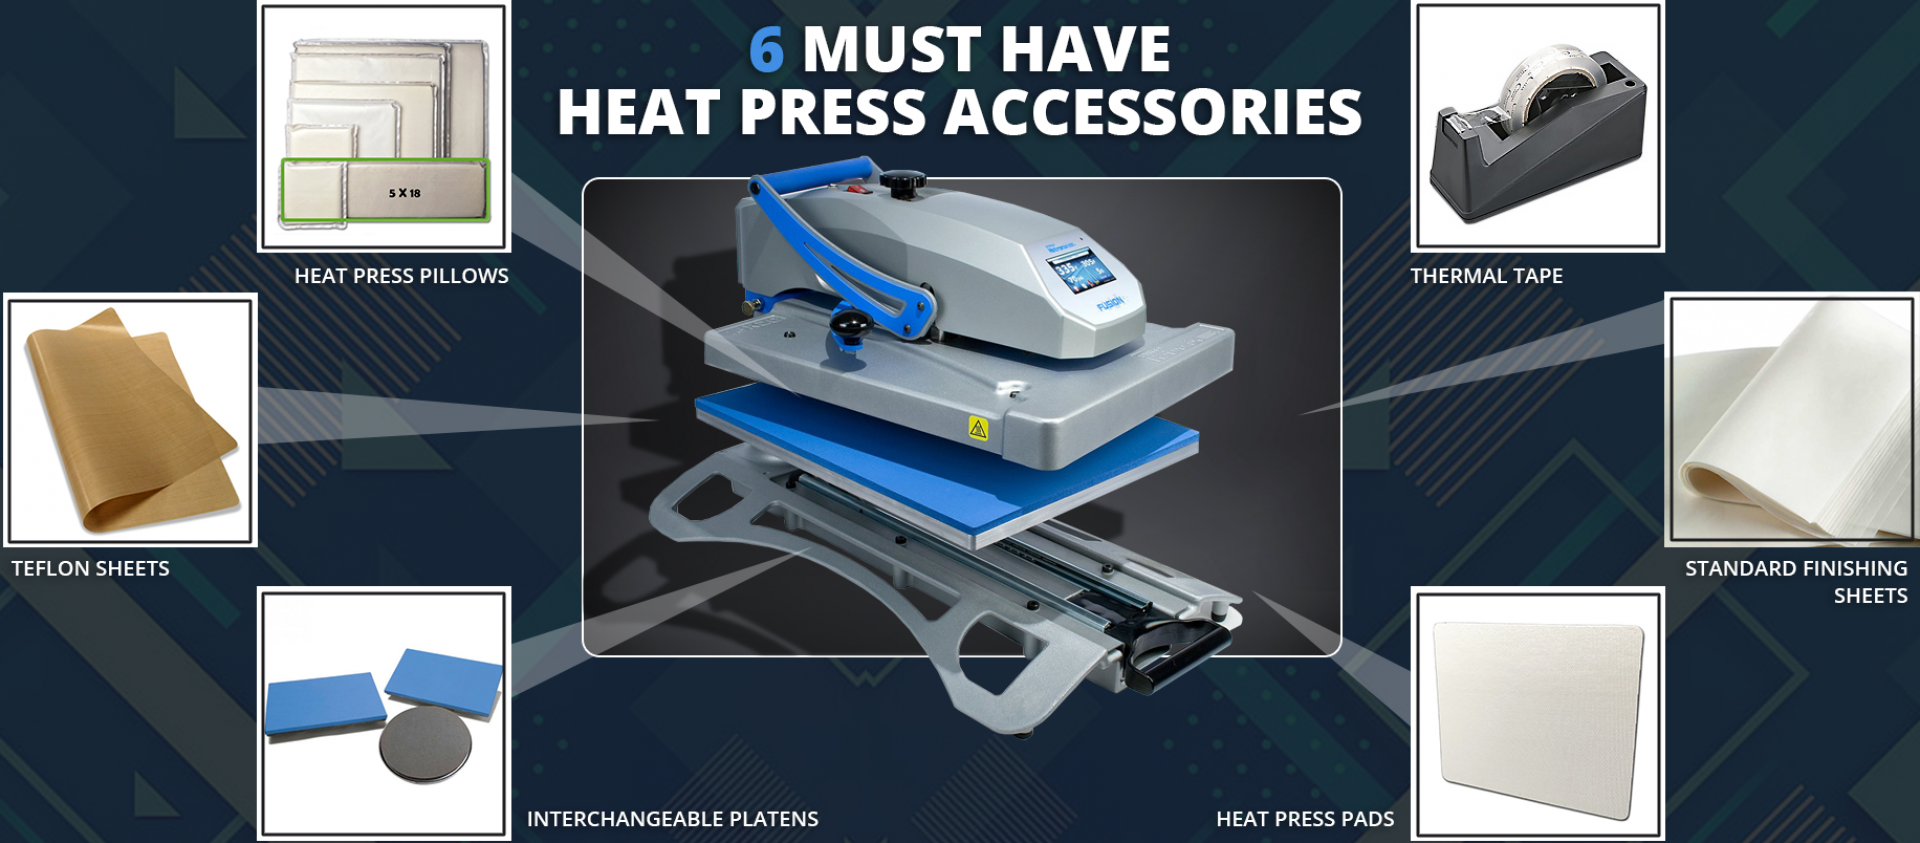 6-Must-Have-Heat-Press-Accessories-Thumbnail